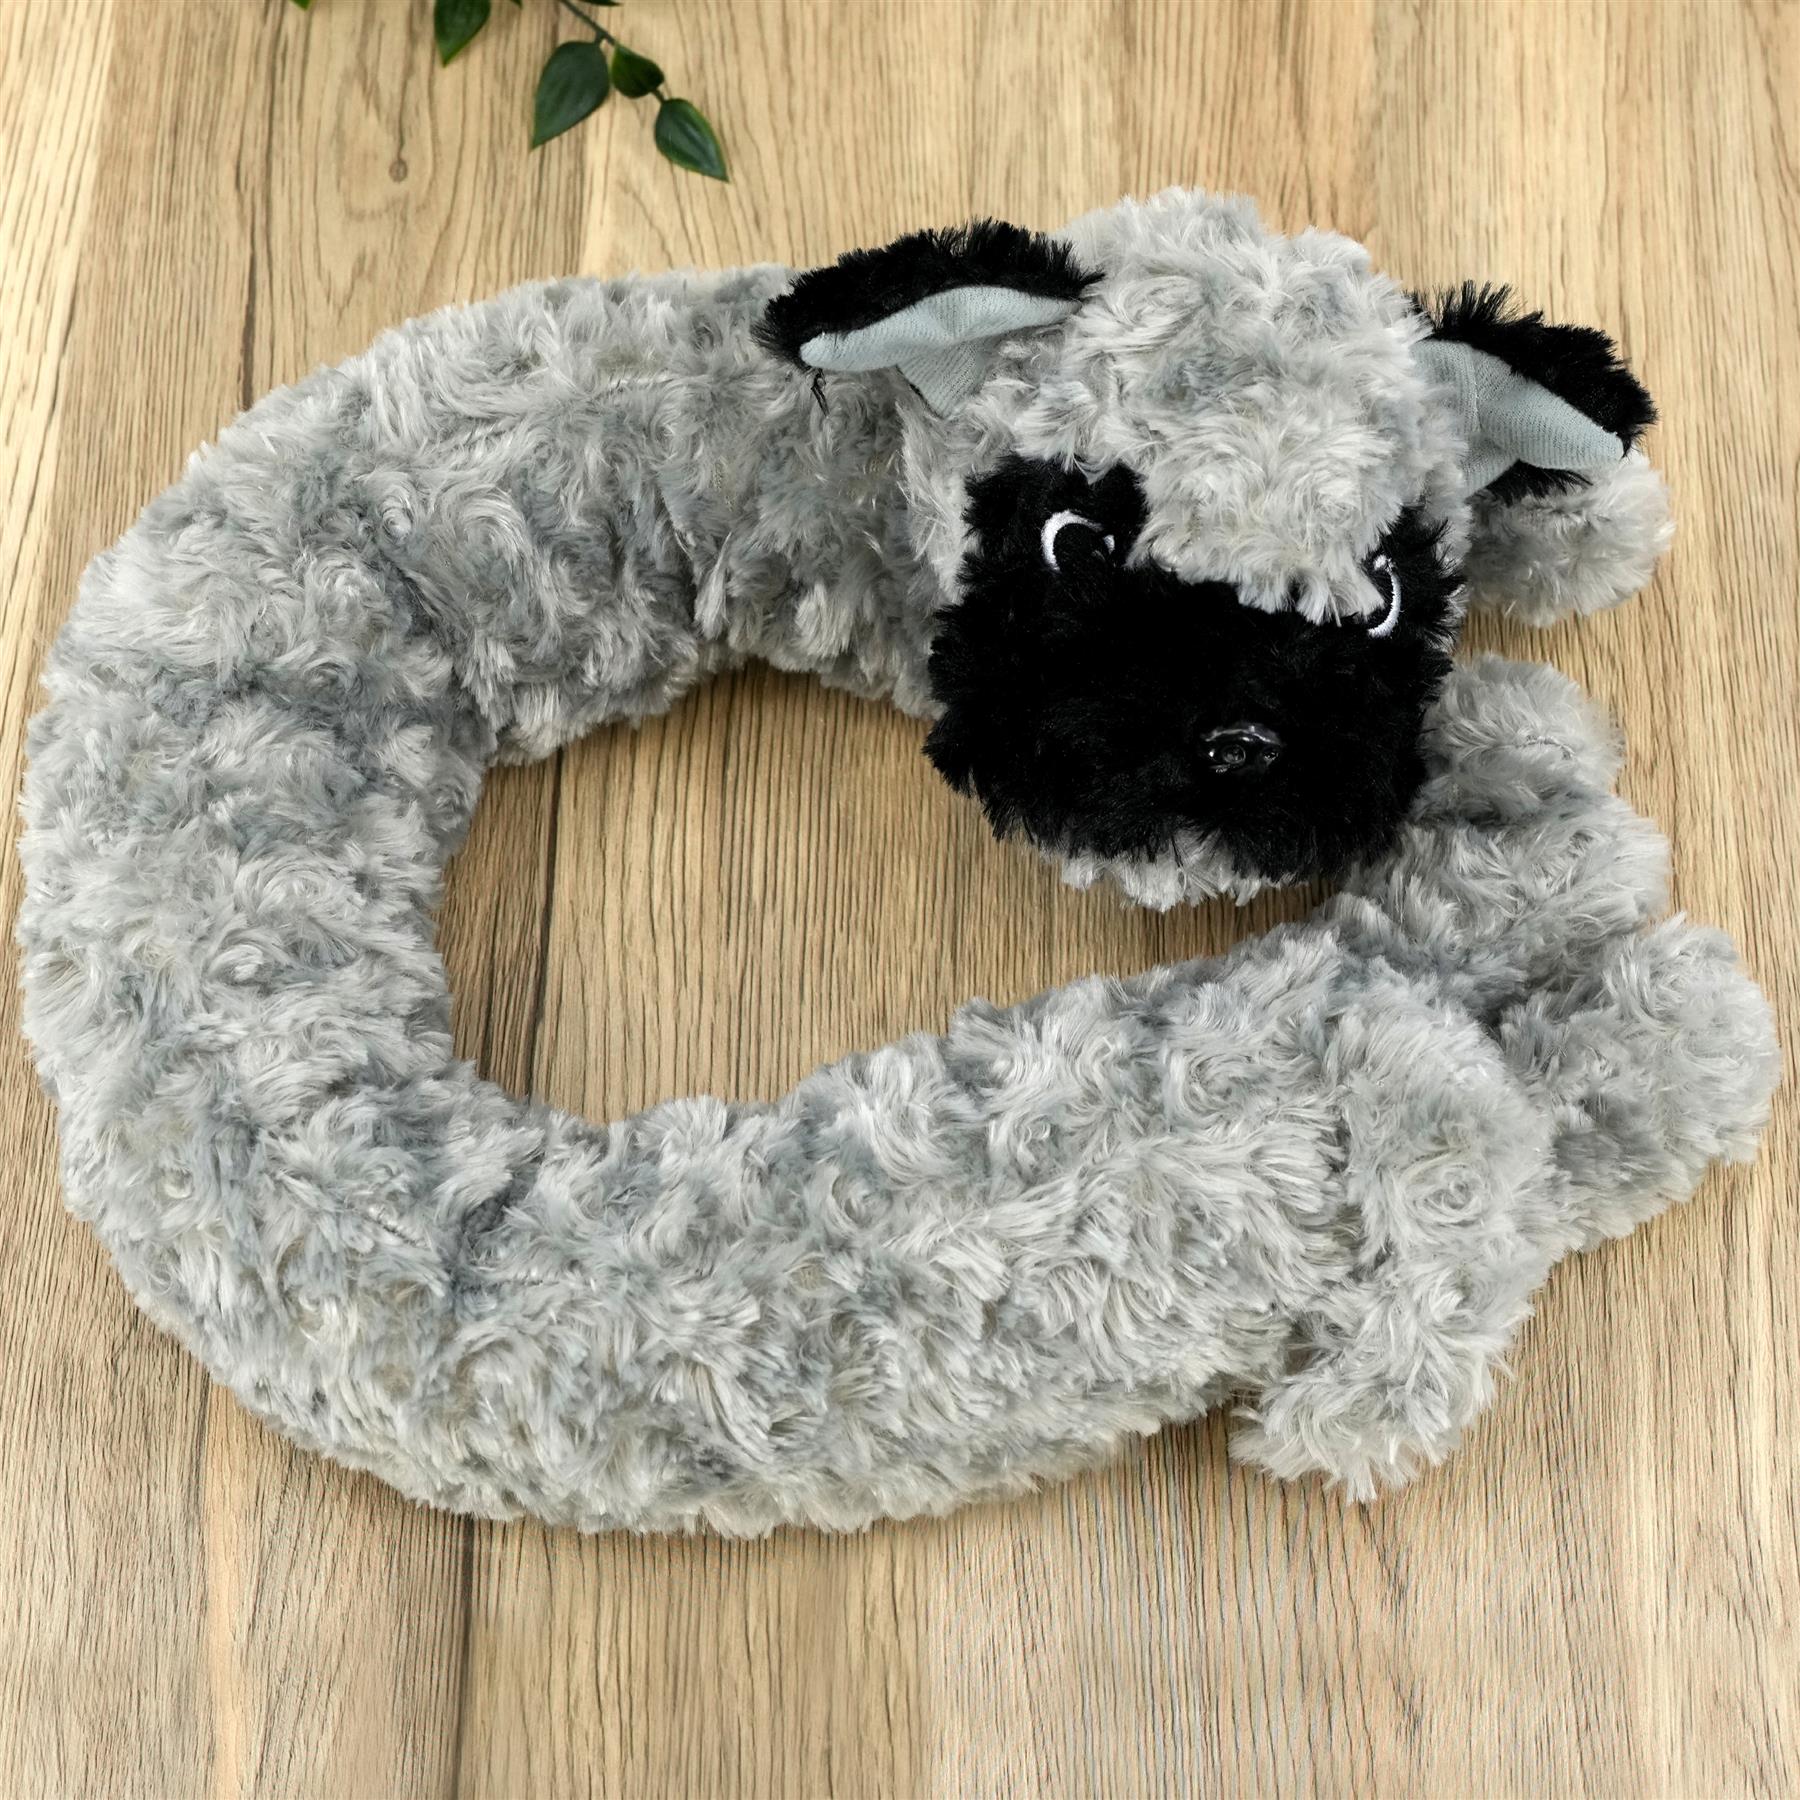 Novelty Grey Dog Excluder by Geezy - The Magic Toy Shop